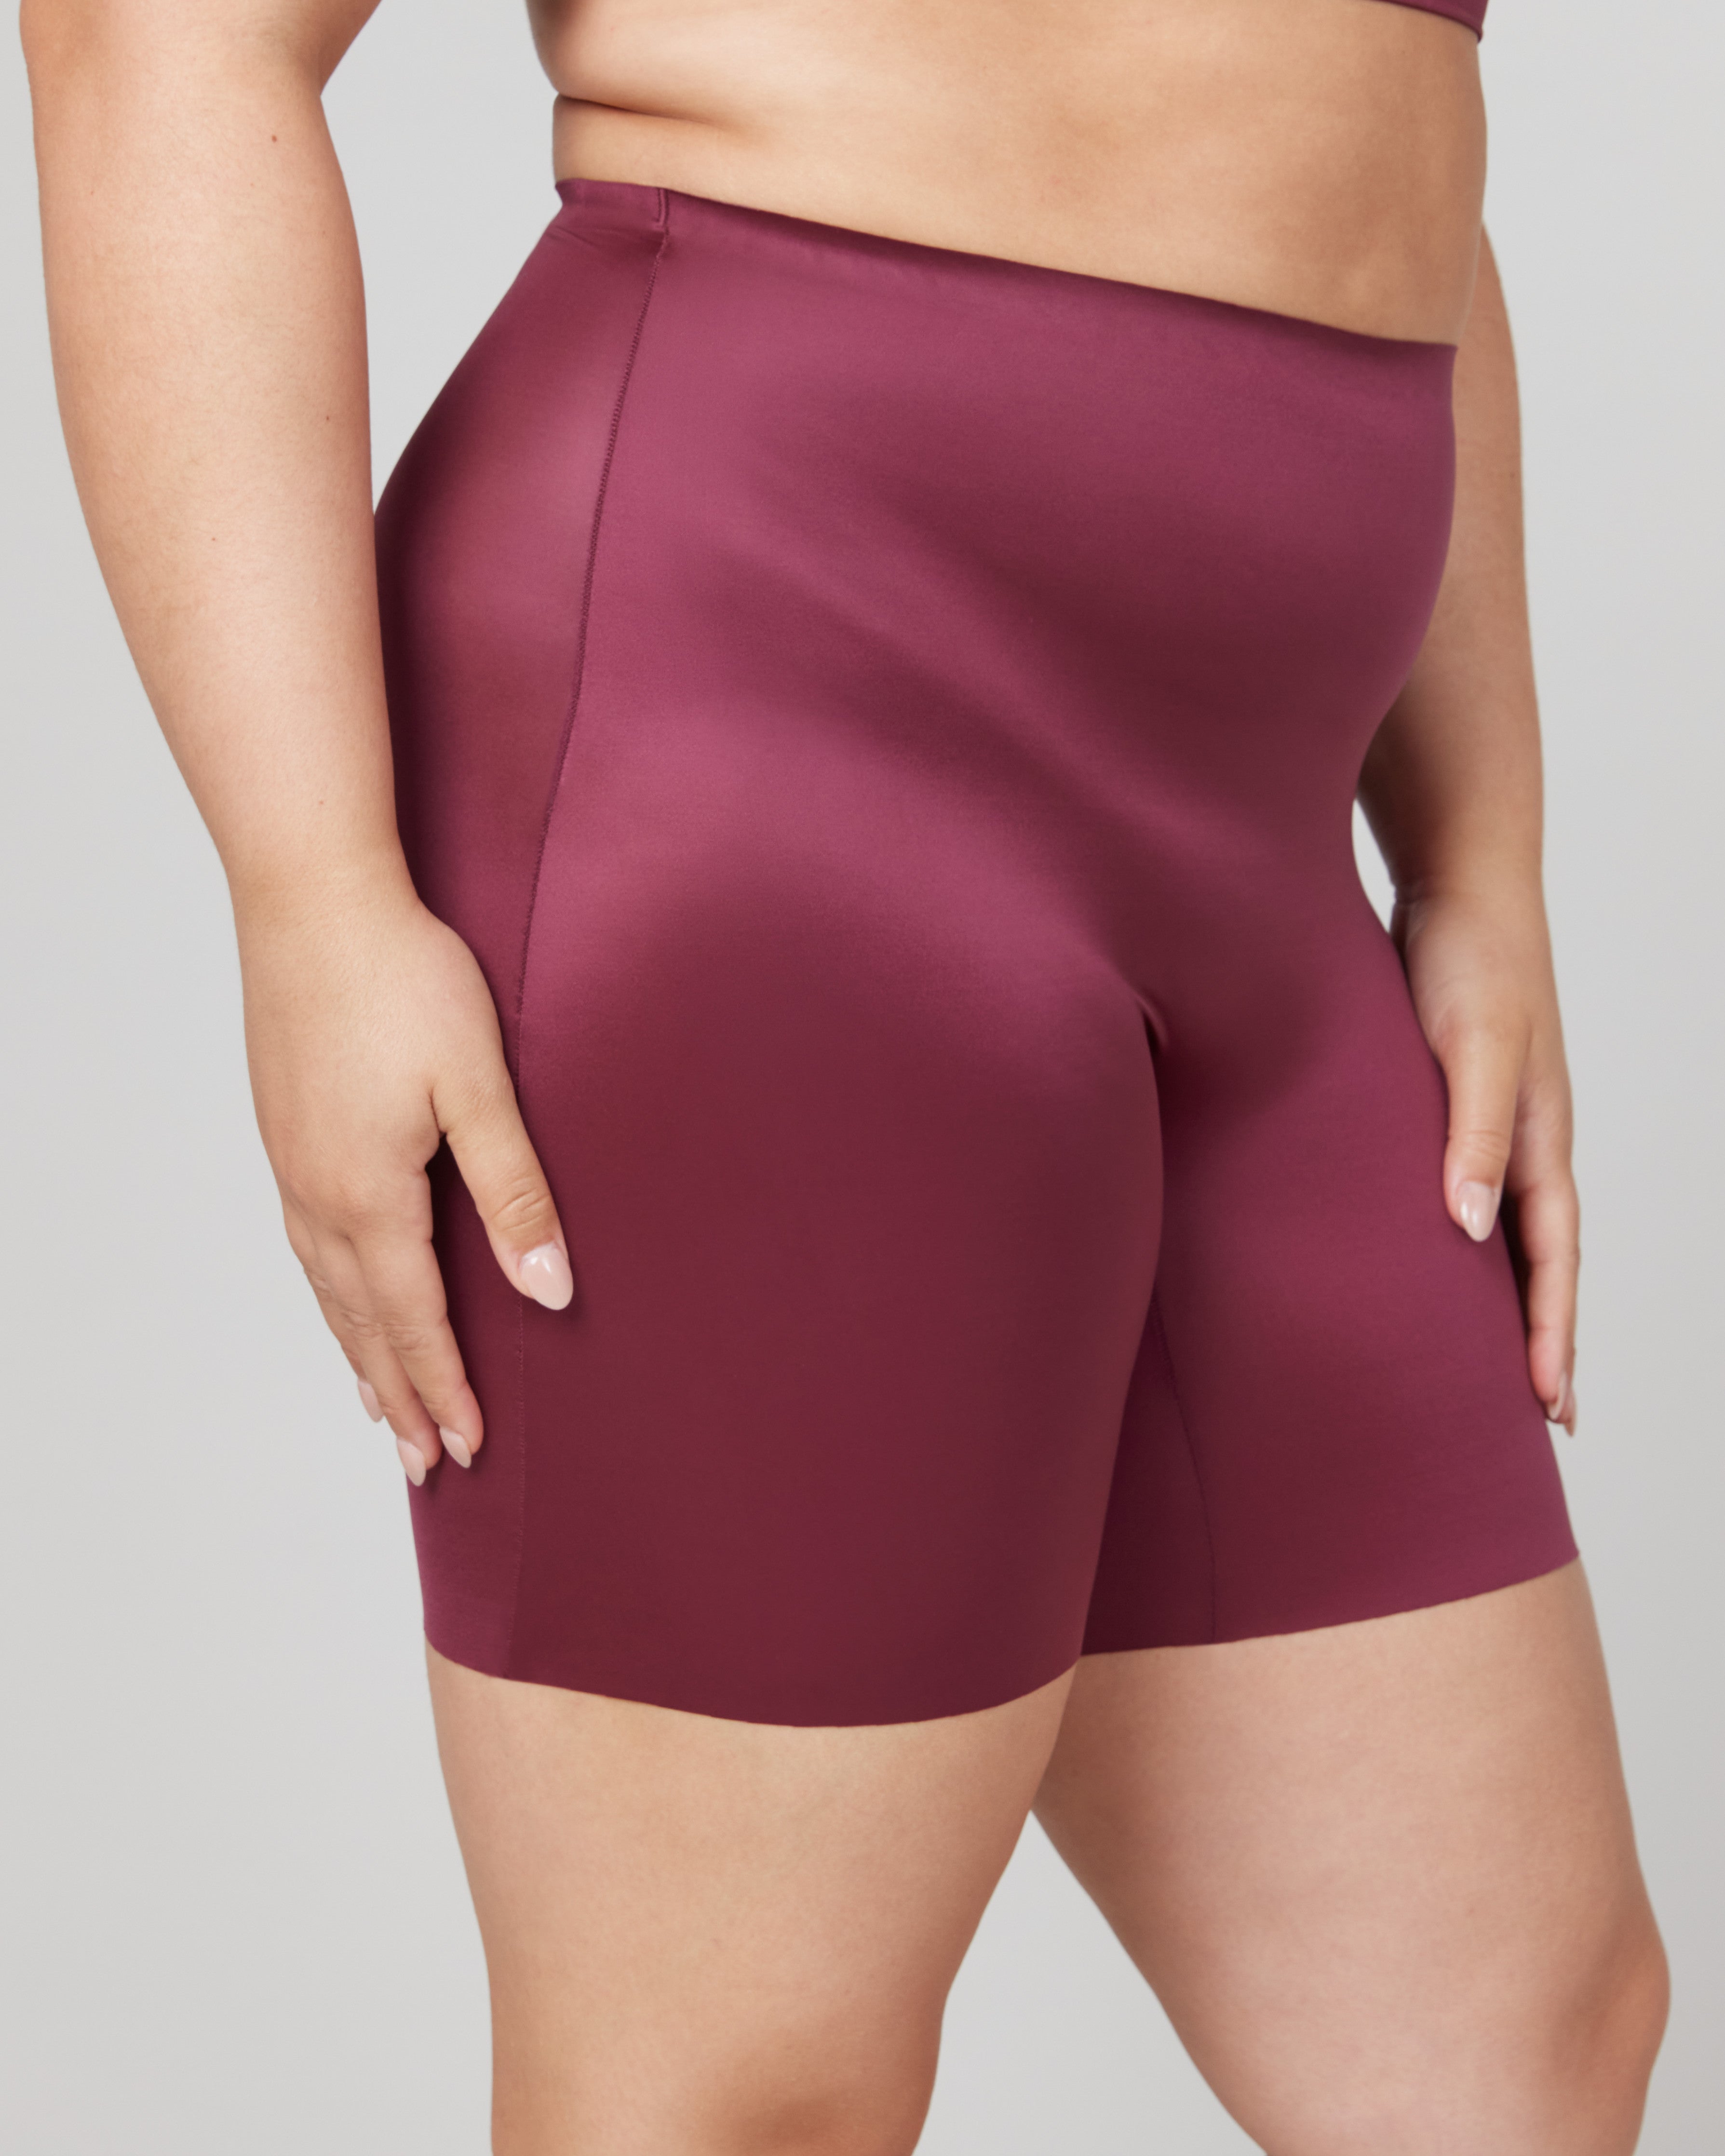 Therapeutix Cellulite Smoothing Short TCELLSS Natural Womens Shapewear